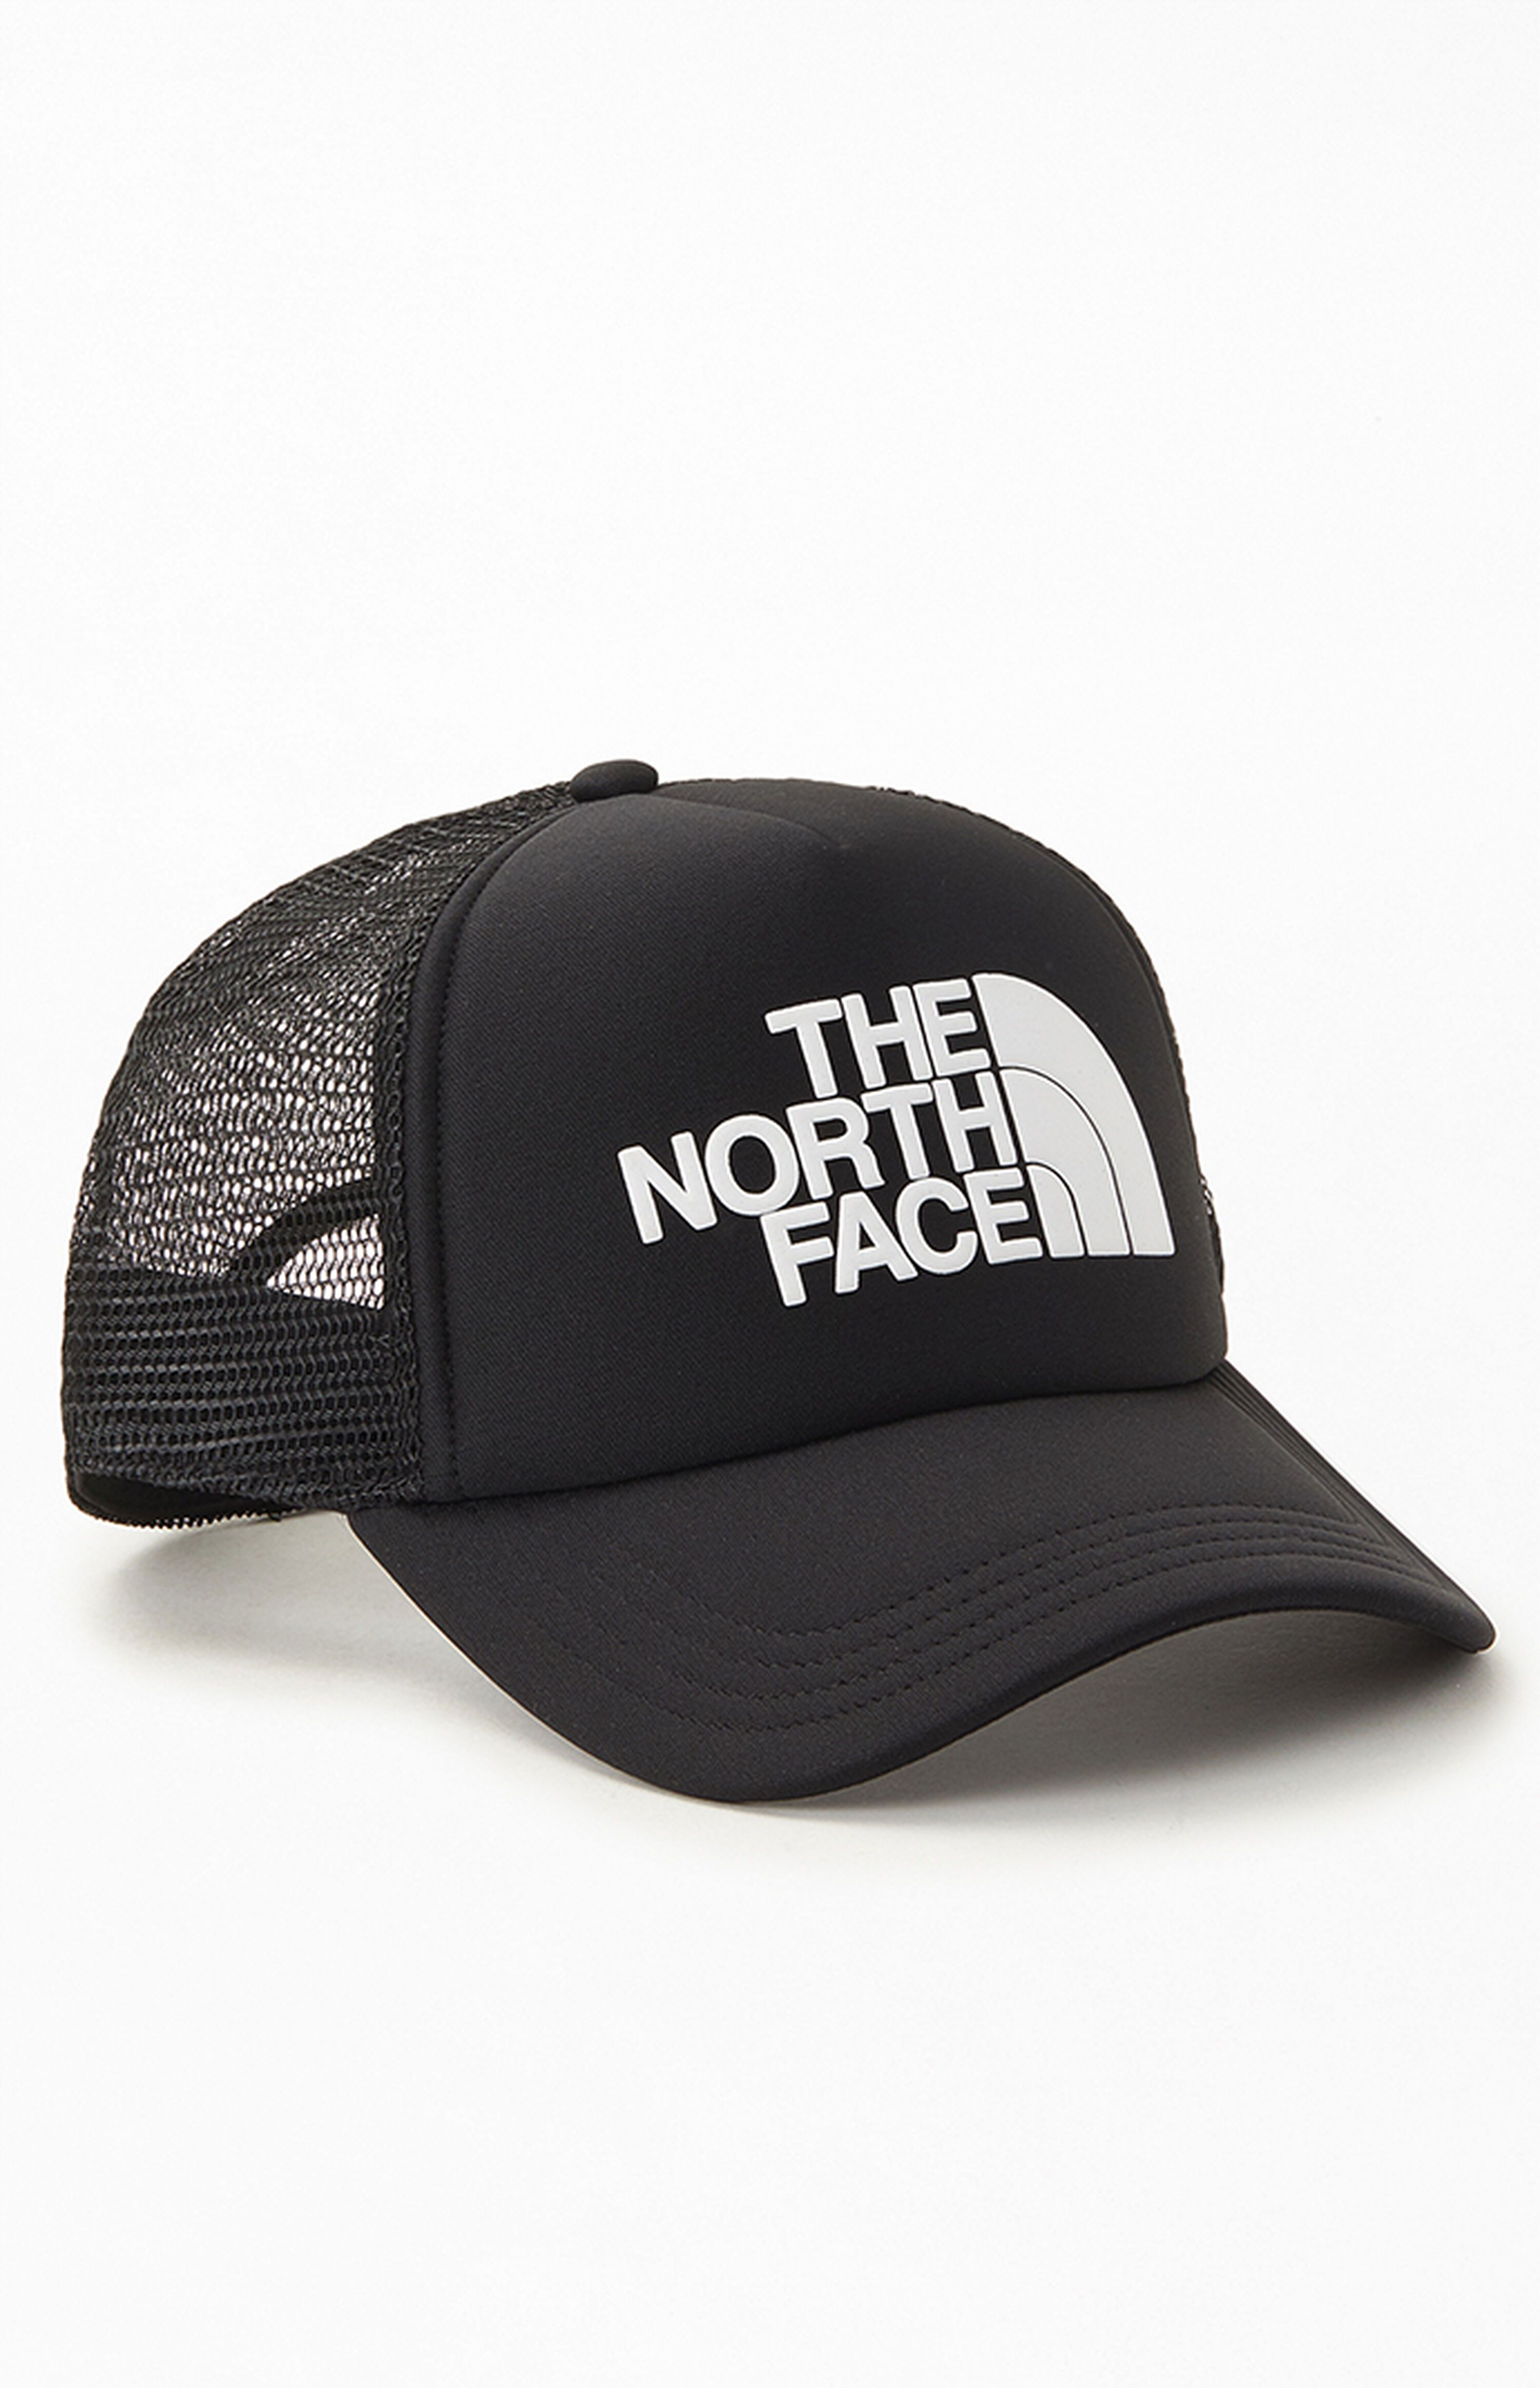 The North Face Logo Trucker Snapback Hat | PacSun | PacSun